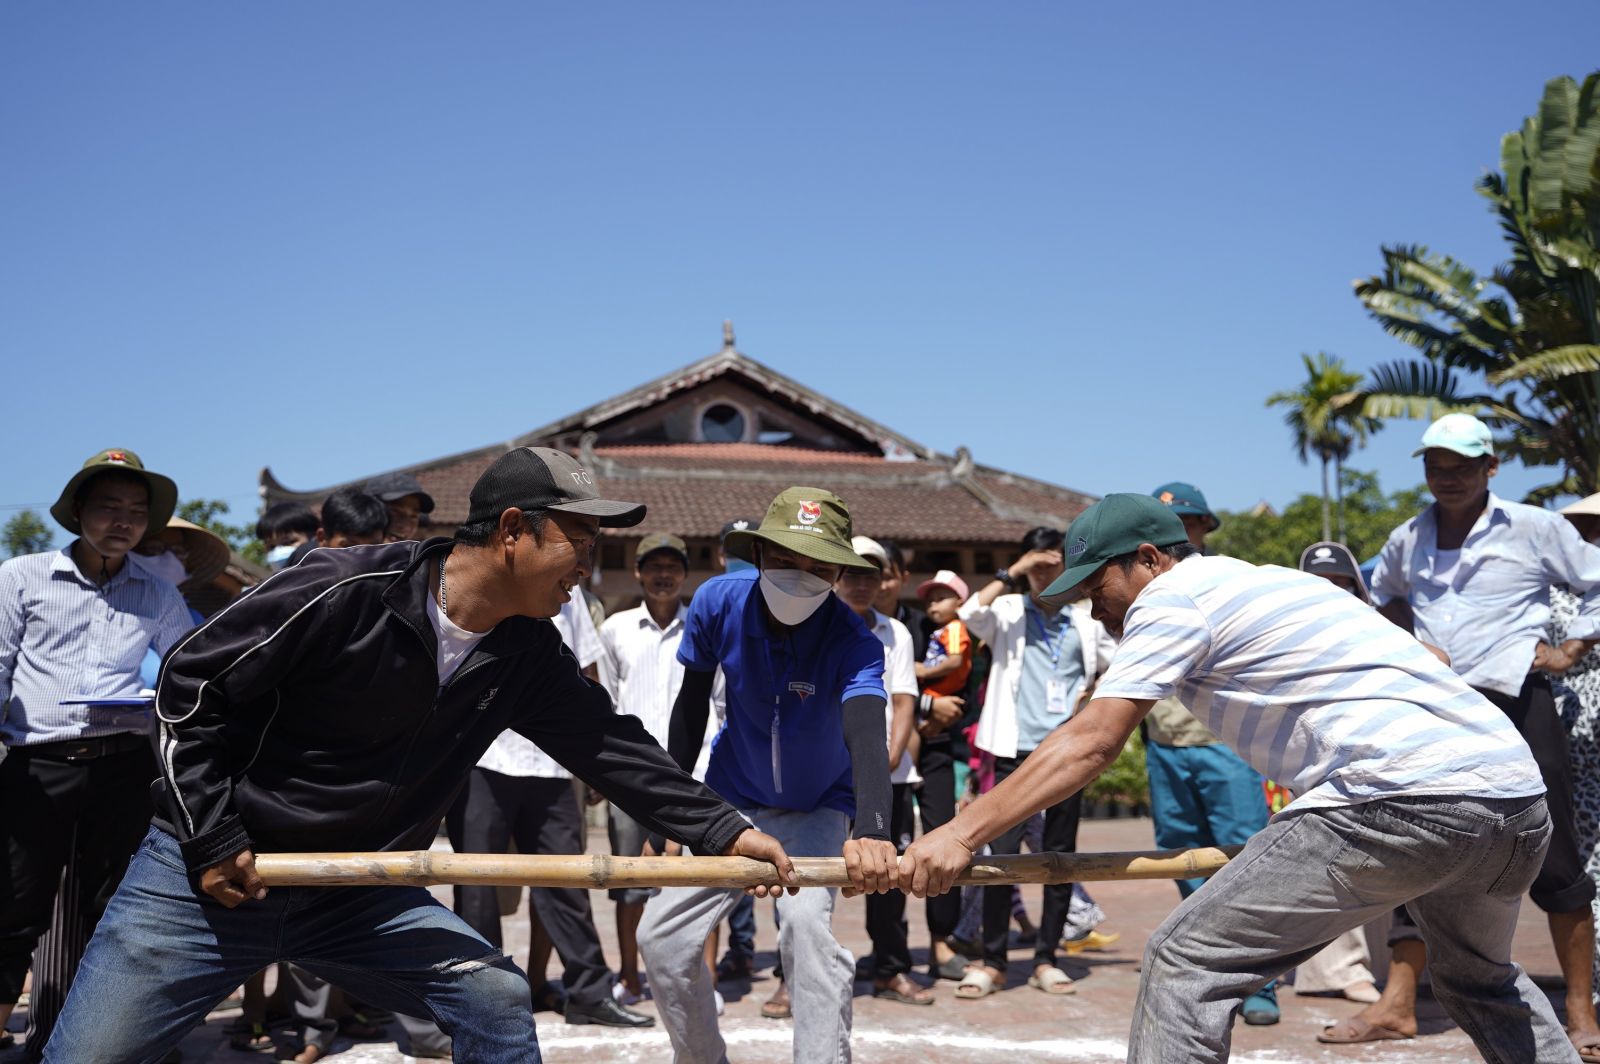 Among the games in the framework of The country’s fair and festival, the most competitive game is stick pushing. However, the players still can’t help laughing